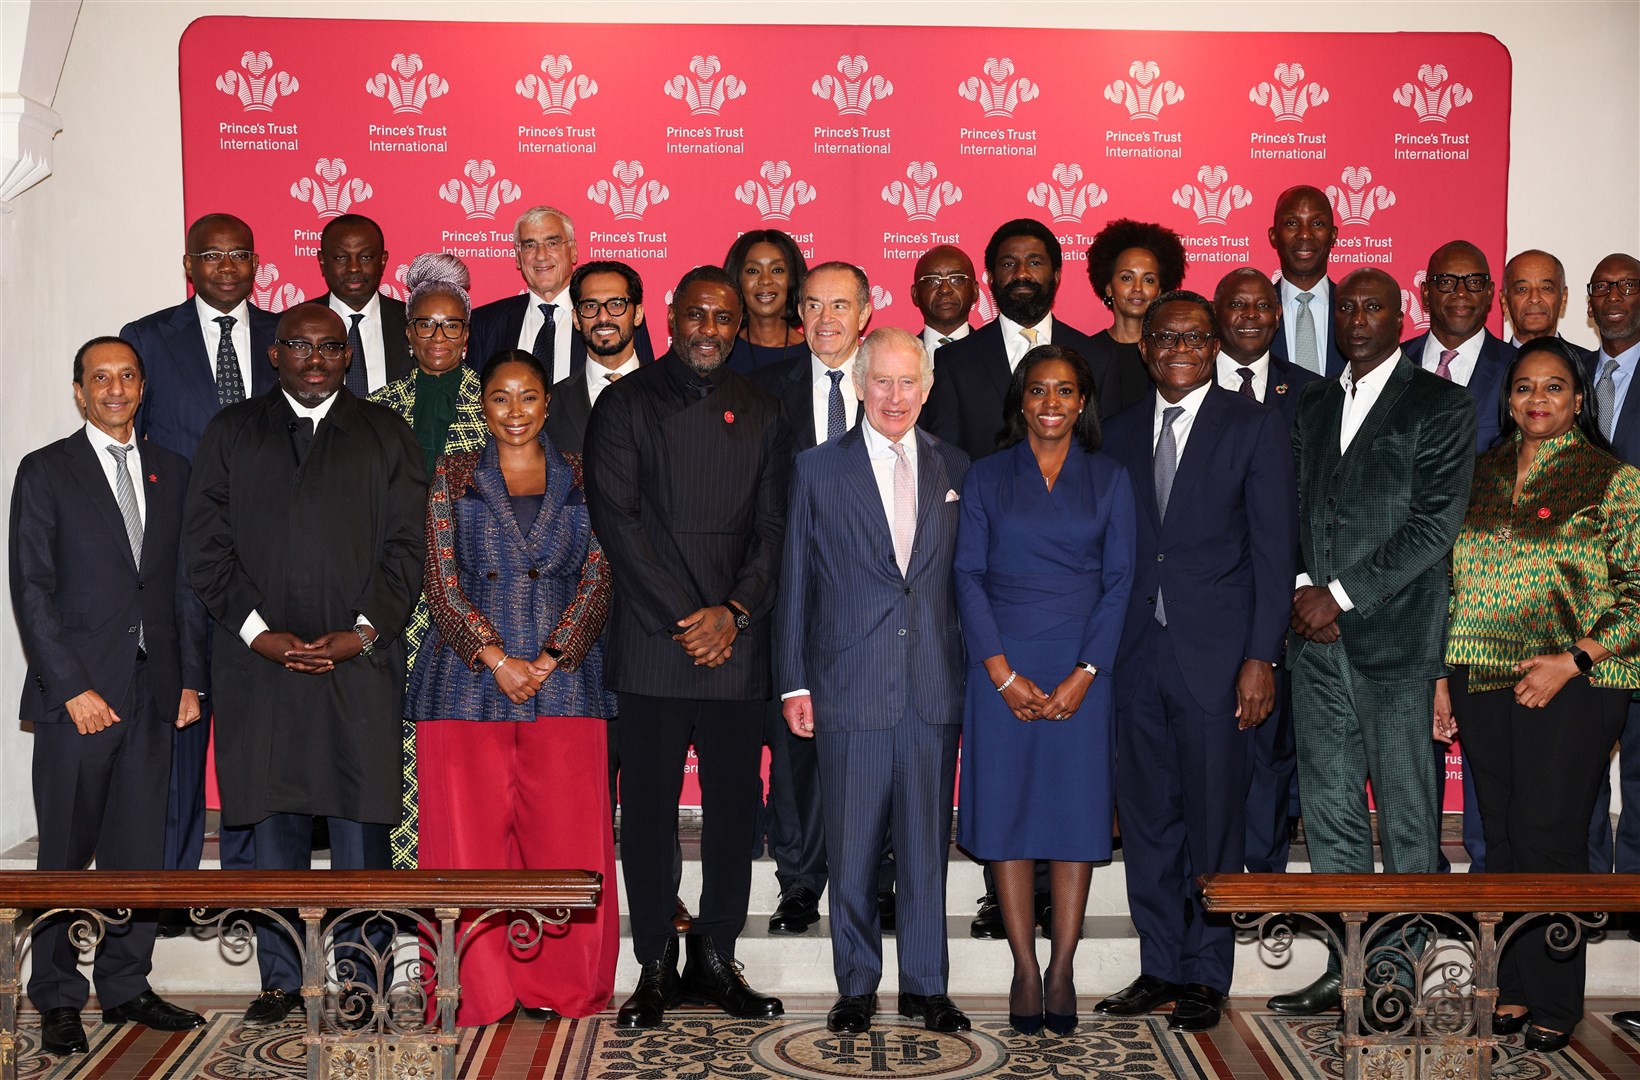 Charles, centre, poses with guests during a reception and discussion to learn about opportunities for young people and the role of entrepreneurship in Africa at Garrison Chapel in London on Wednesday (Adrian Dennis/PA)